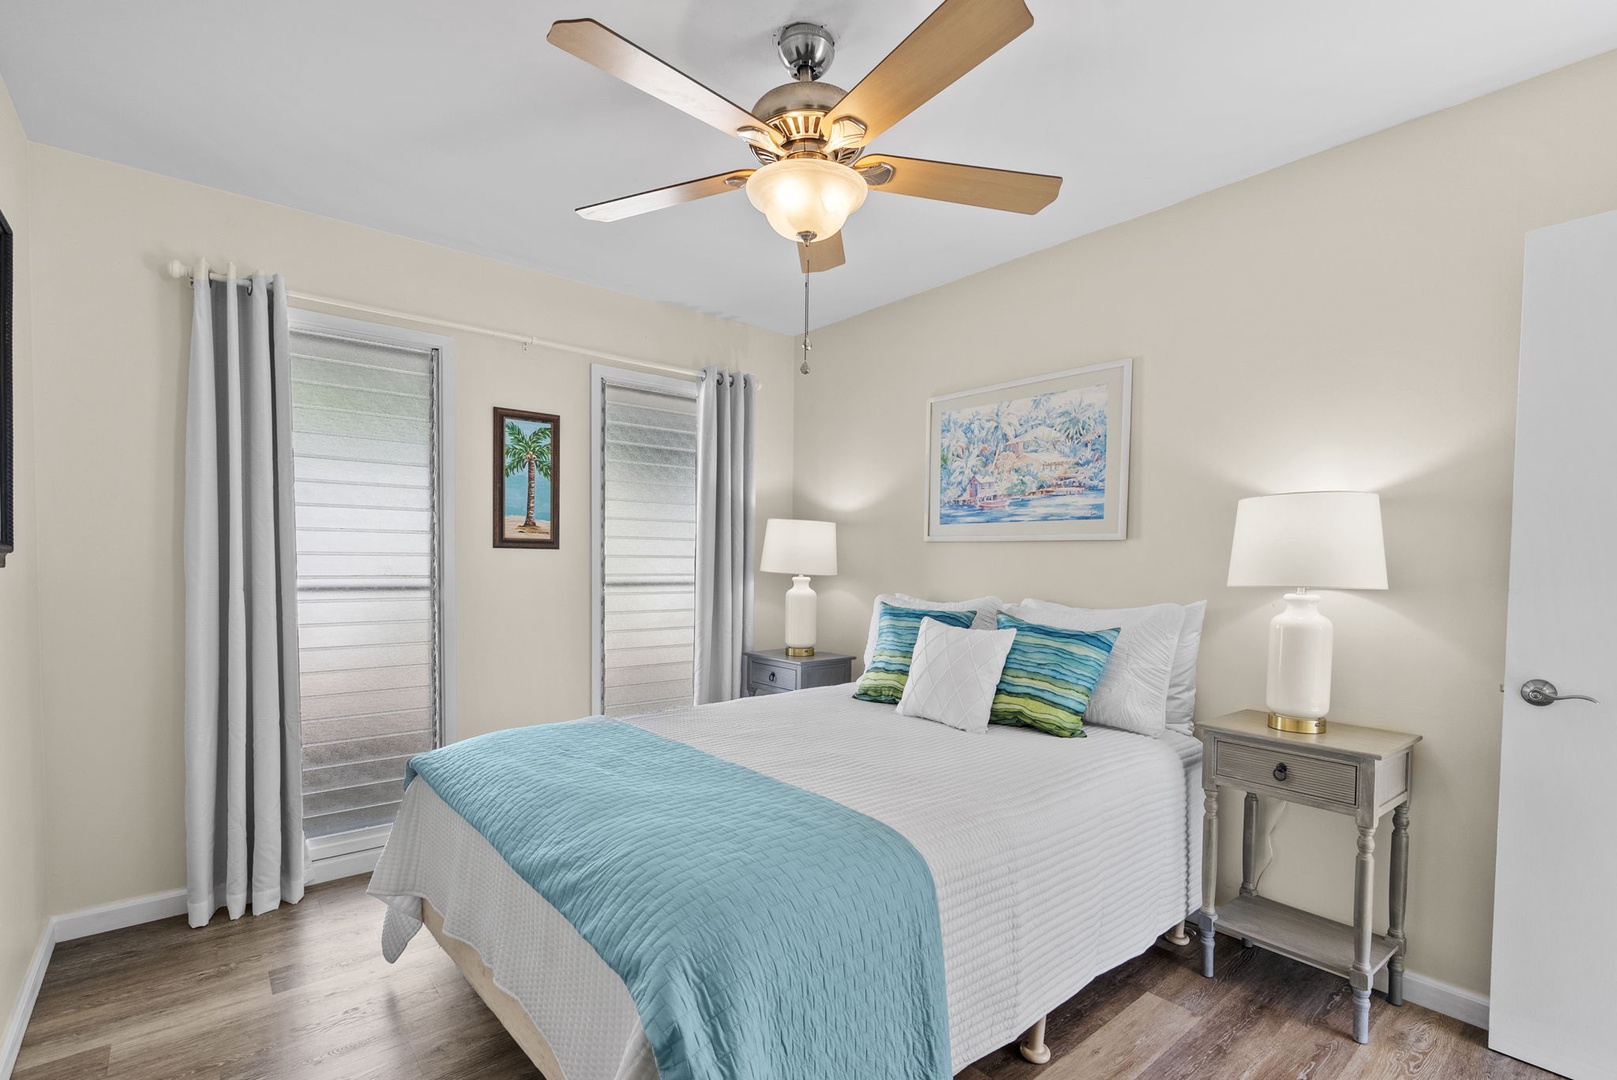 Kailua Vacation Rentals, Hale Aloha - Third guest suite, or the fourth bedroom, boasts a plush bed draped in luxurious linens for a restful retreat.